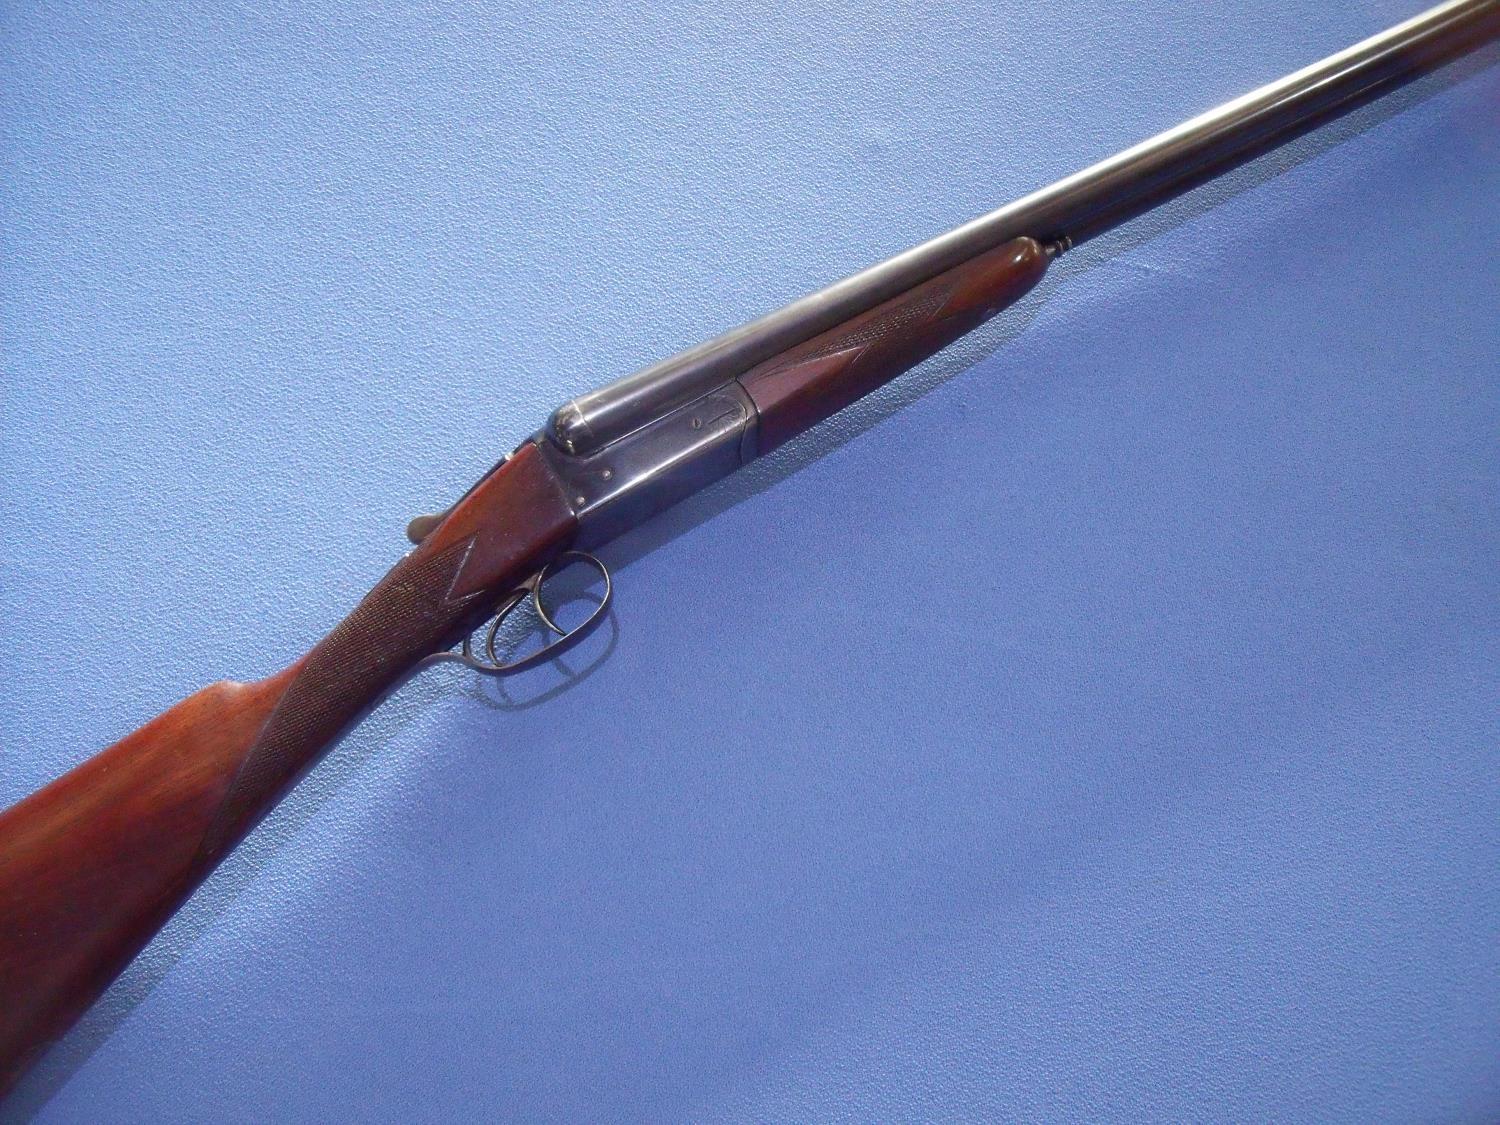 Modern Arms Co 12 bore side by side ejector shotgun with 28 inch barrels and 14 inch stock, serial